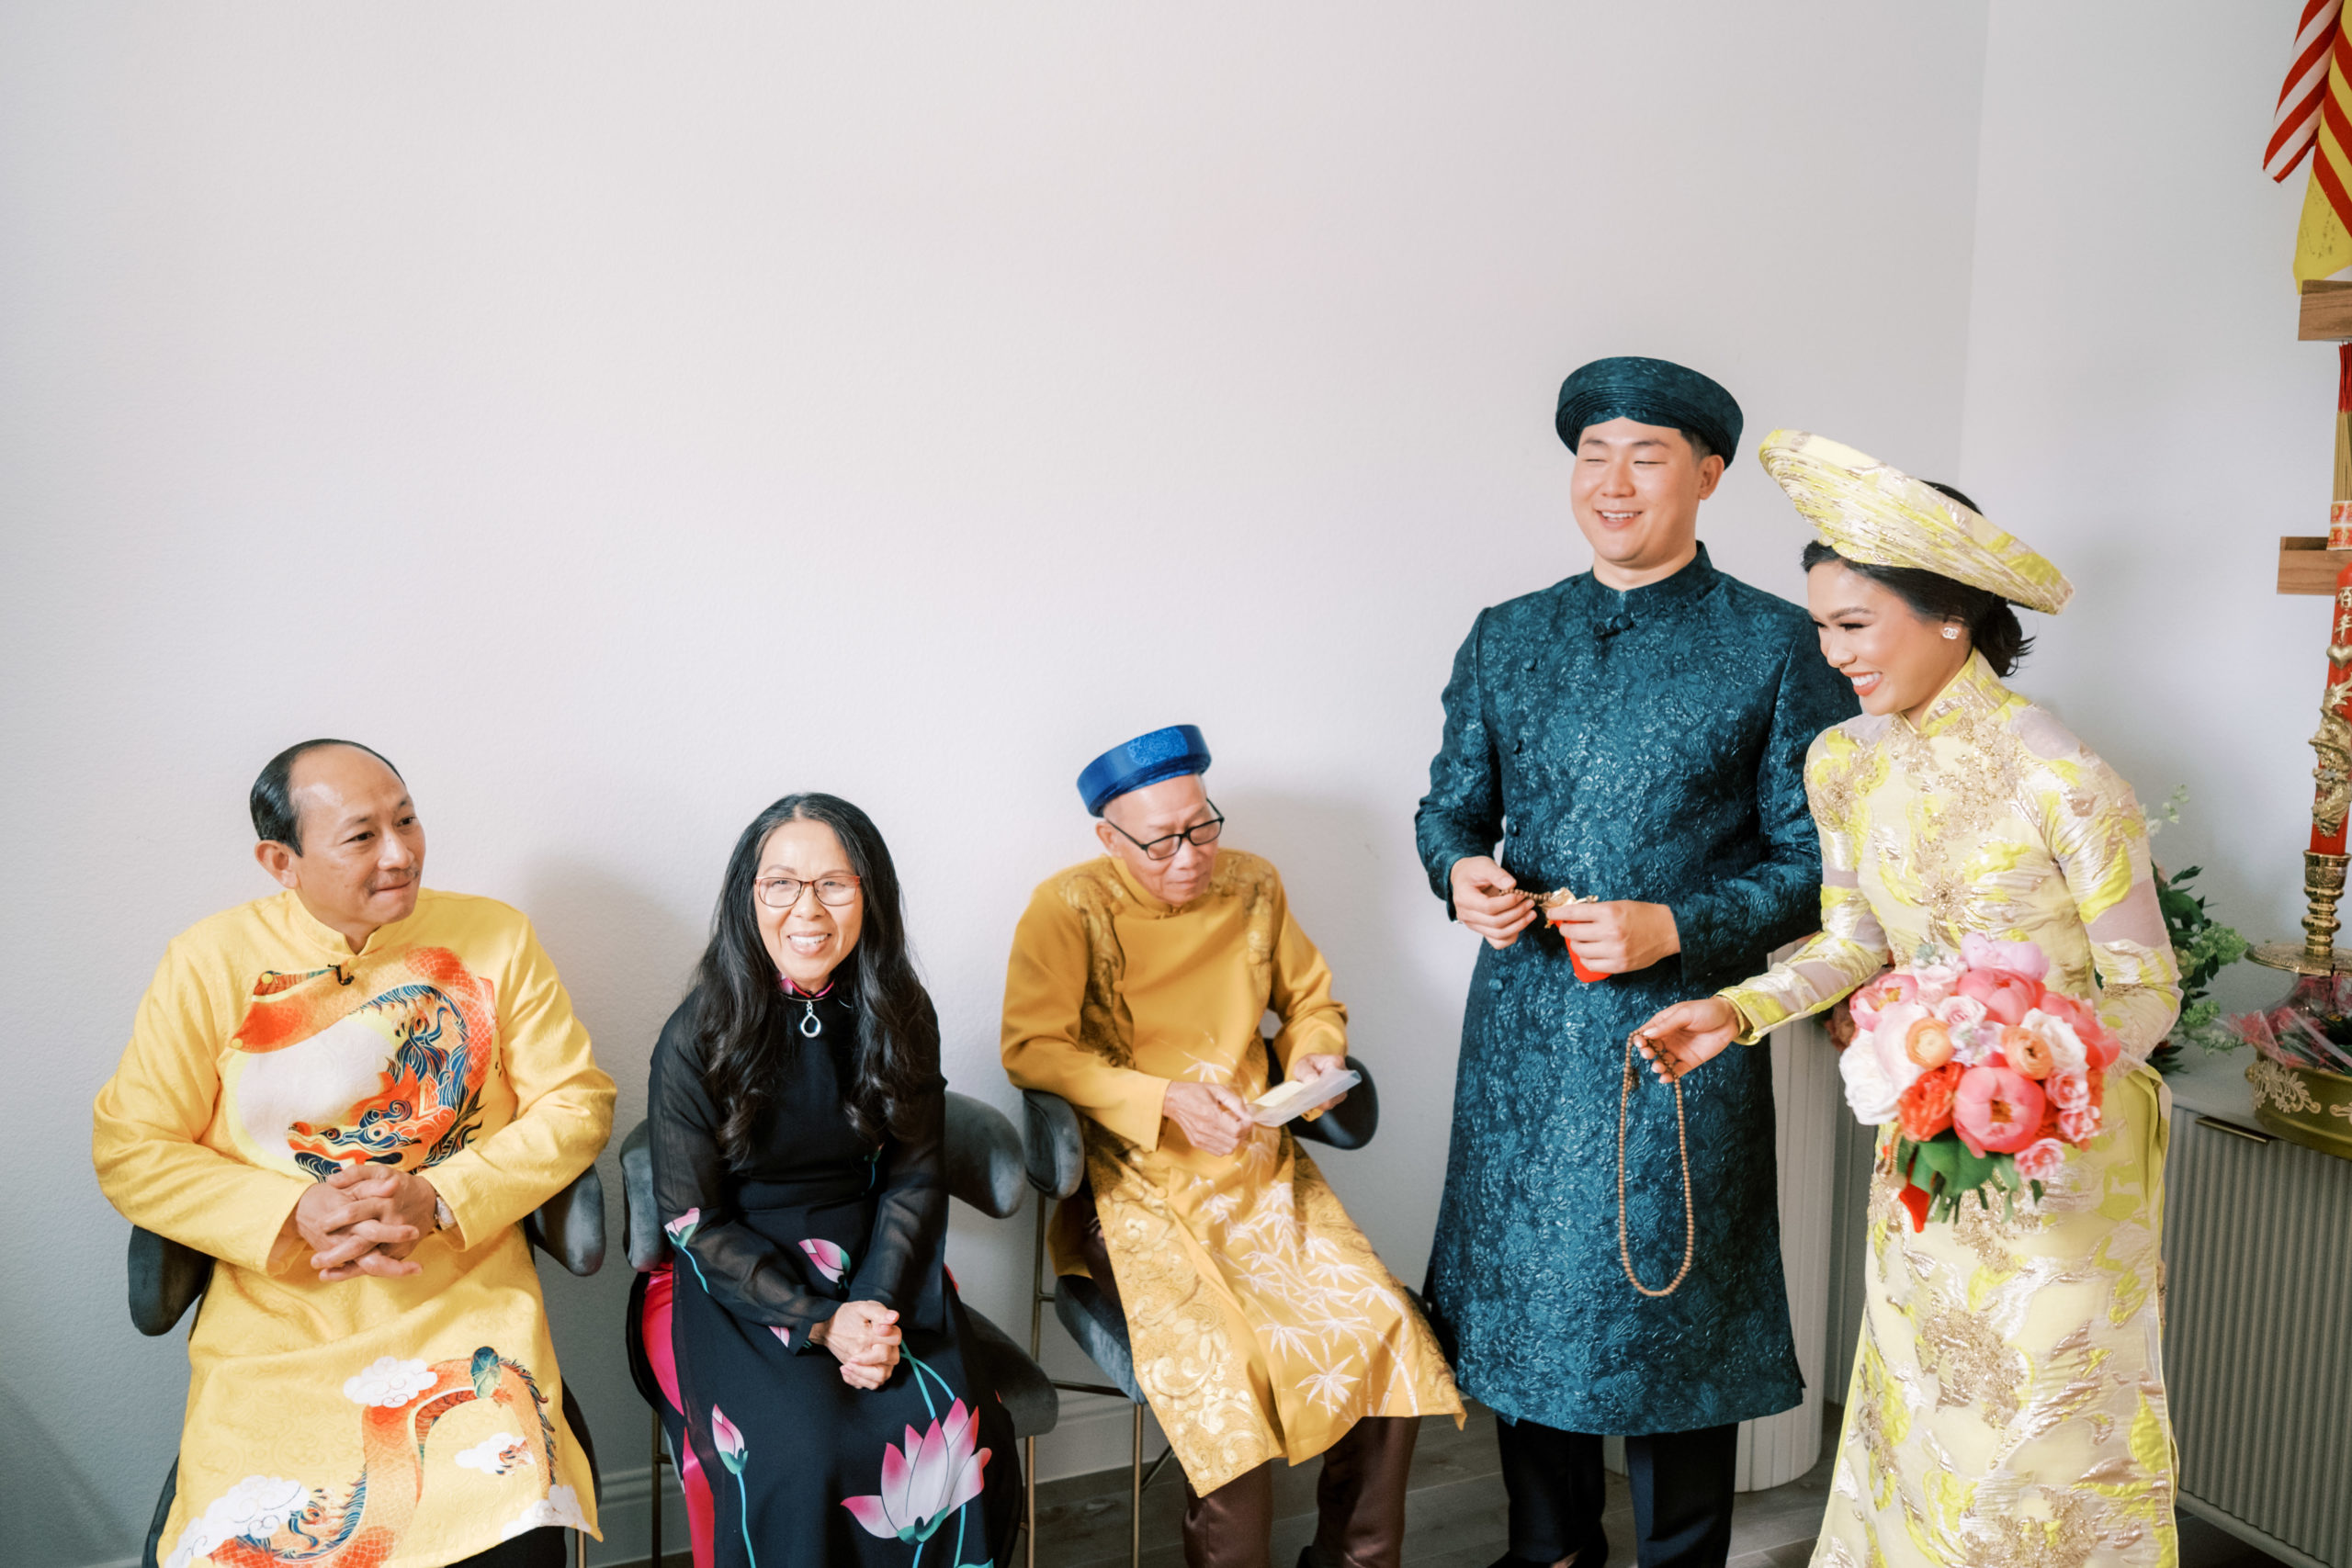 Blogger Hoang-Kim Cung and her new husband Johnny during the Le Ruoc Dau, a part of the Vietnamese Wedding traditions.